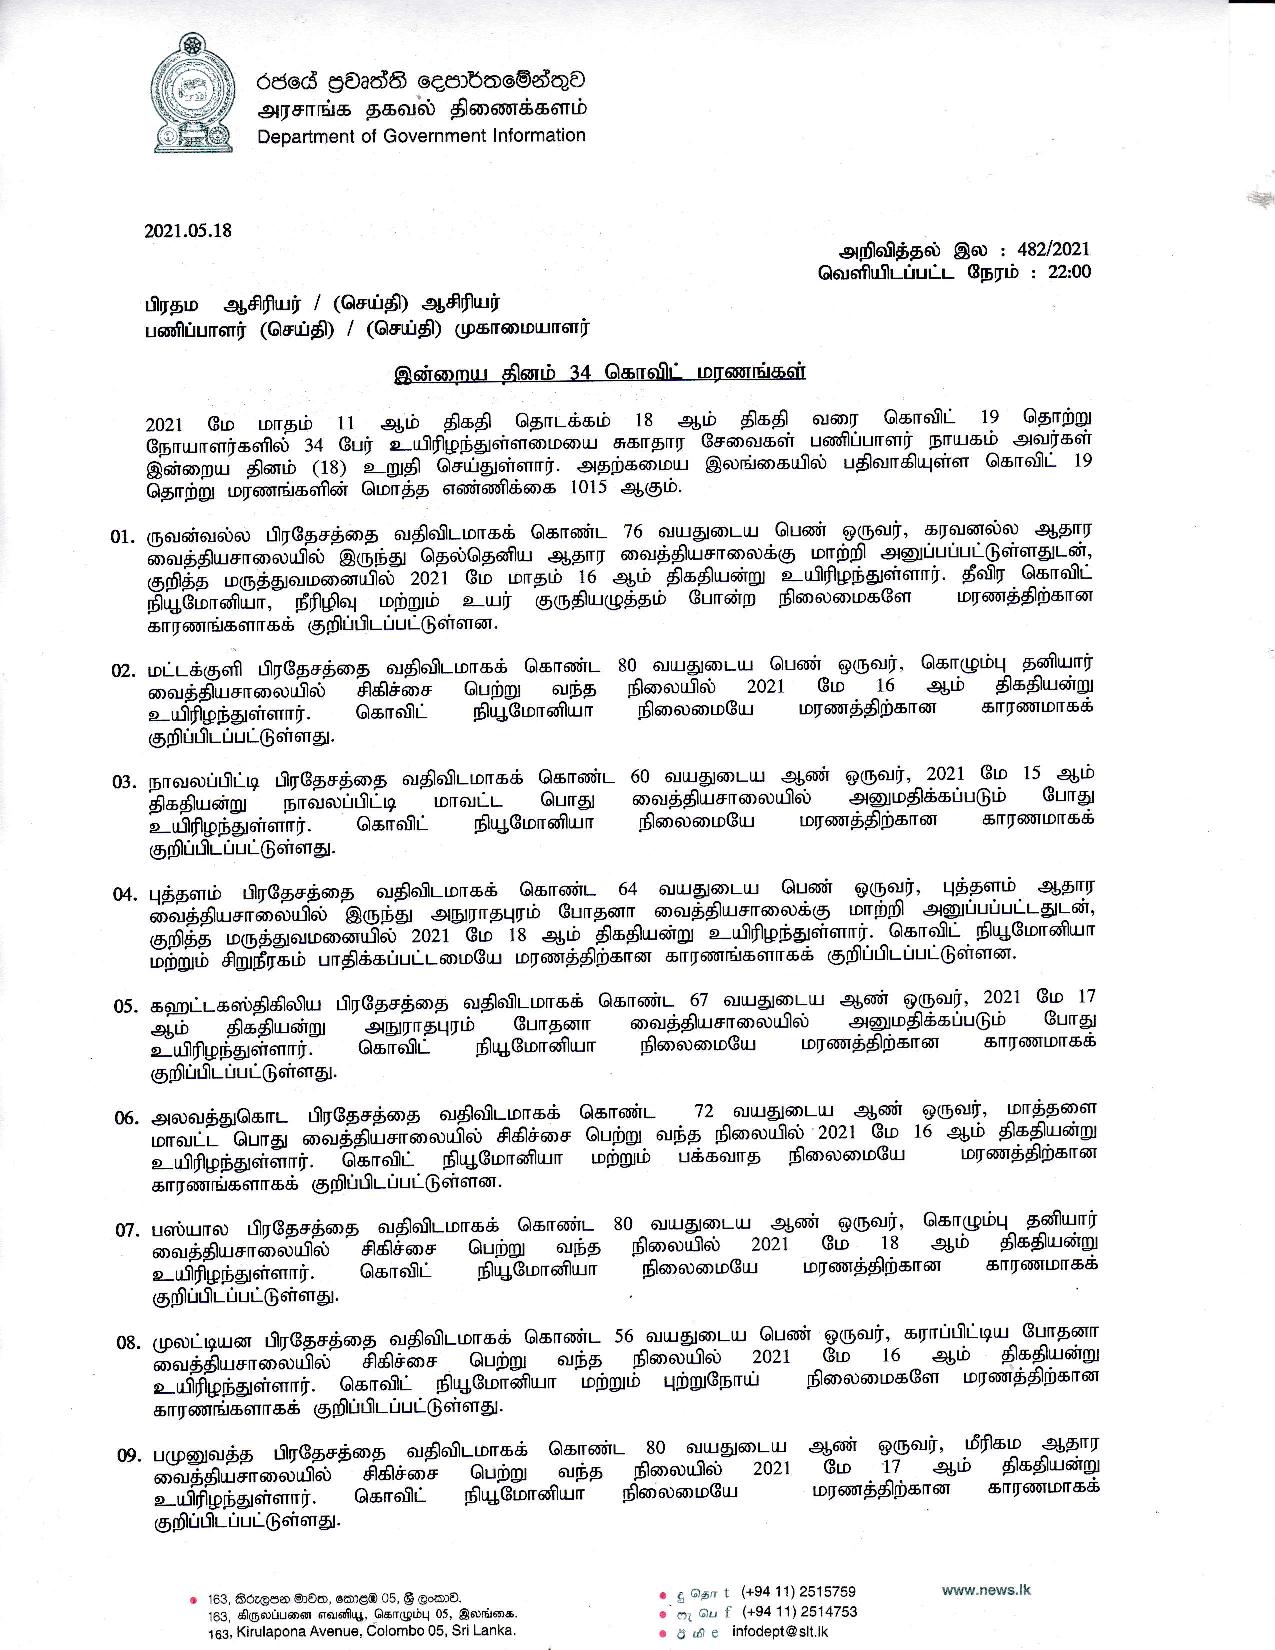 Release No 482 Tamil page 001